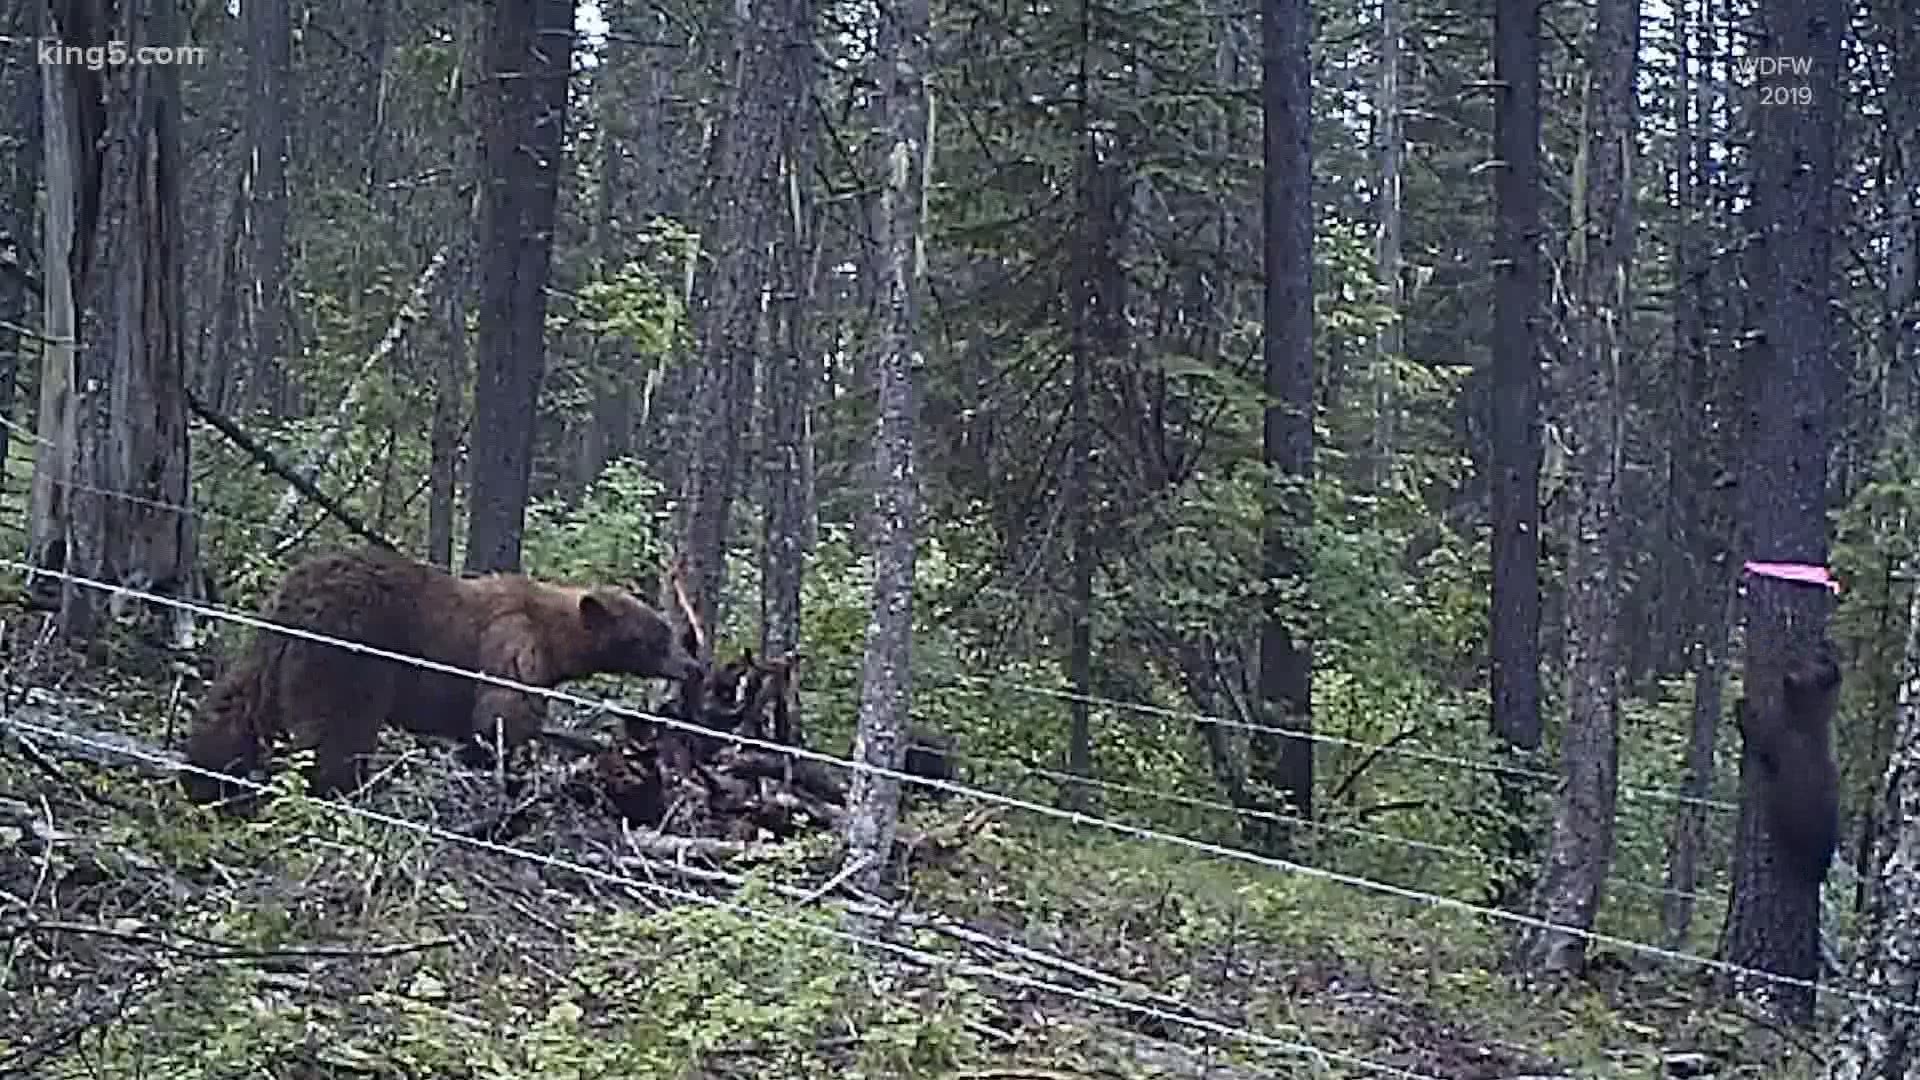 The Washington State Department of Fish and Wildlife is using a meticulous new technique to count and track black bears, one hair at a time.